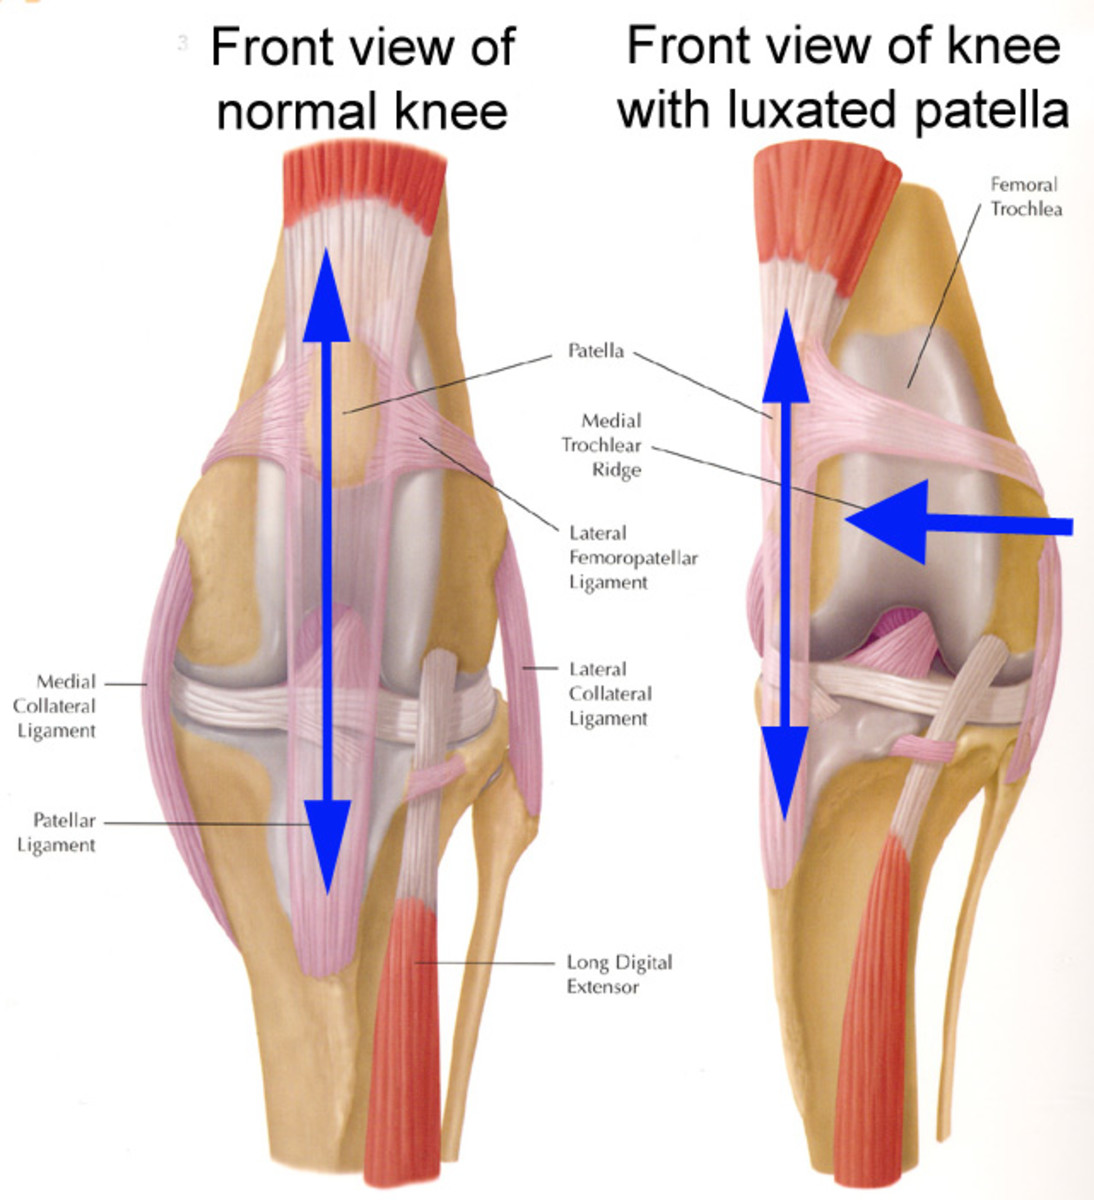 The patella, or kneecap, is part of the stifle joint (knee). In patella luxation, the kneecap luxates, or pops out of place, either in a medial or lateral position. Click to see full size